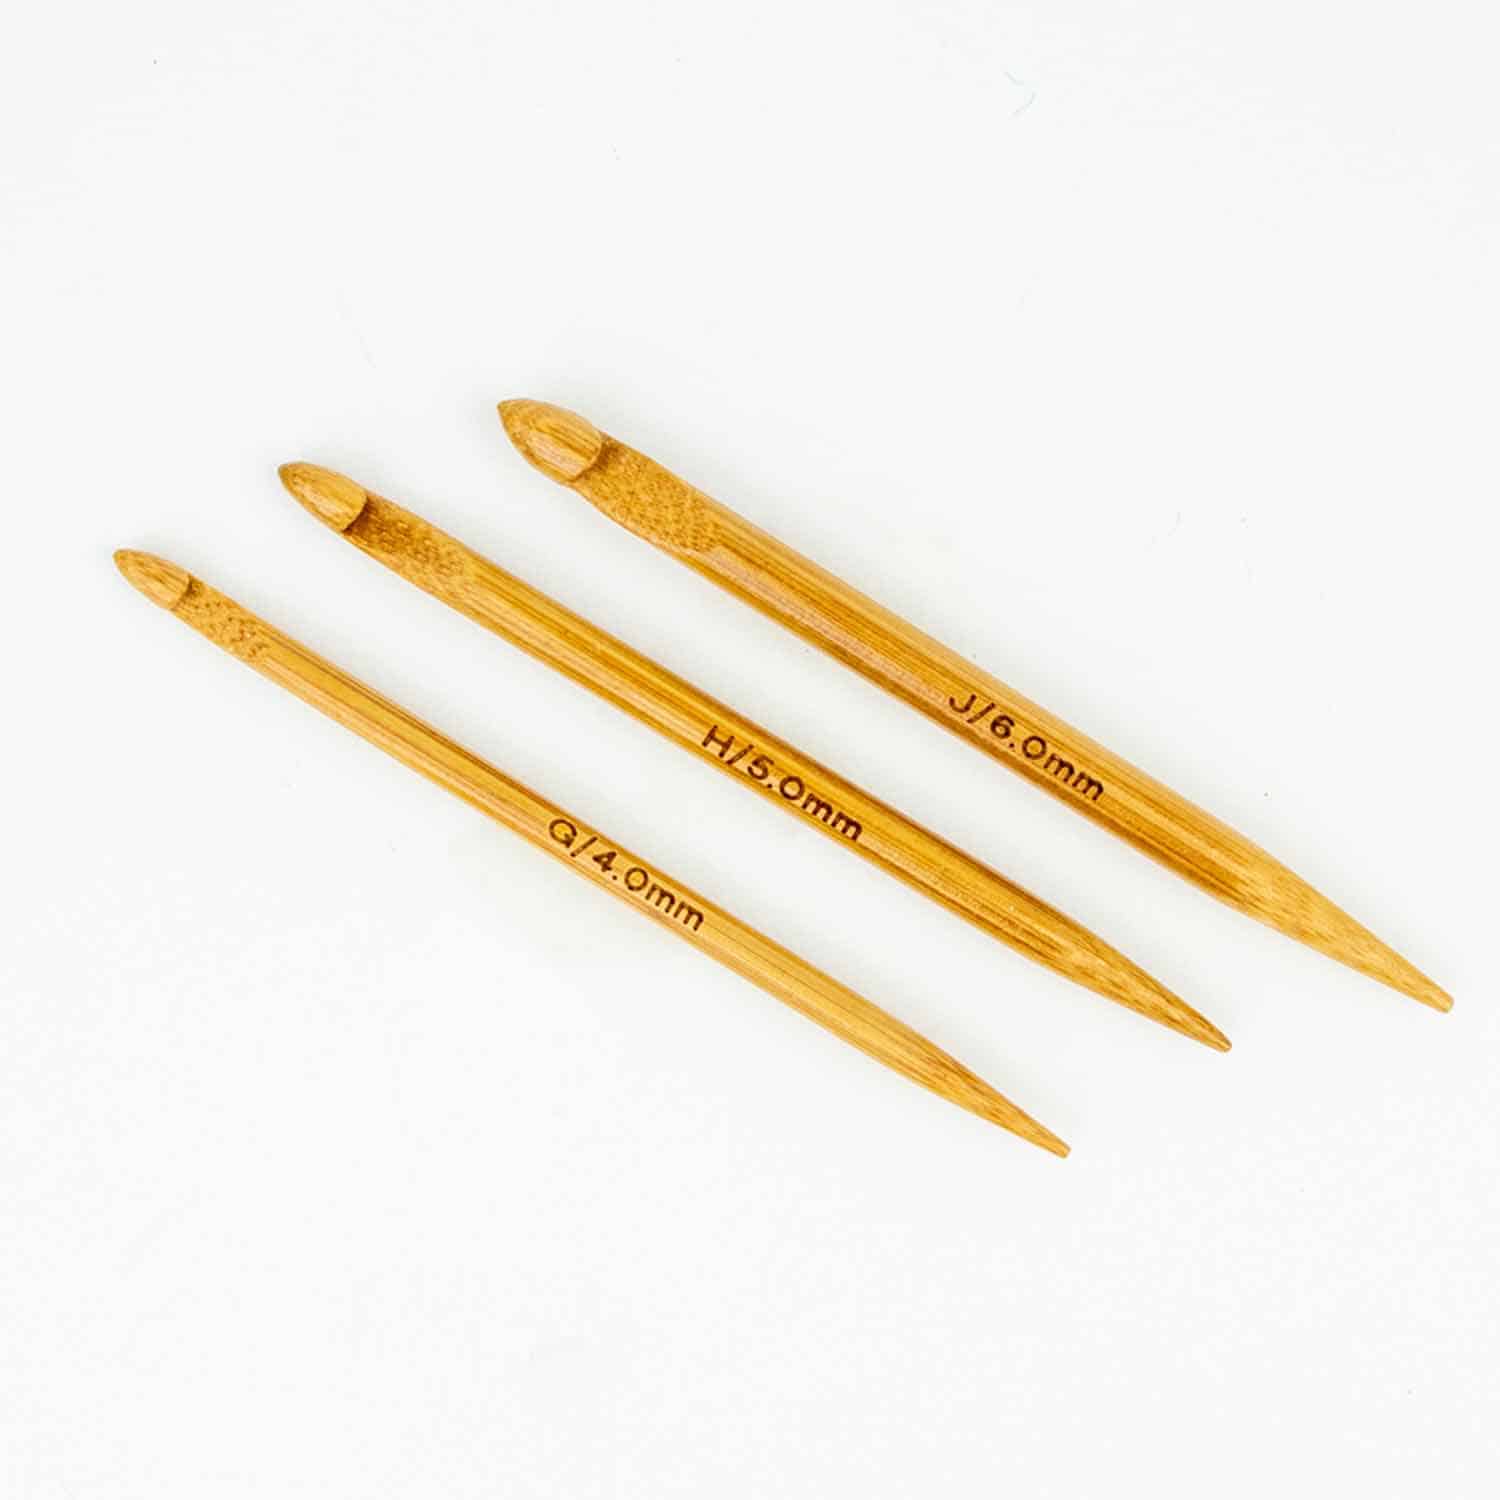 Three small wooden crochet hooks on a white background.